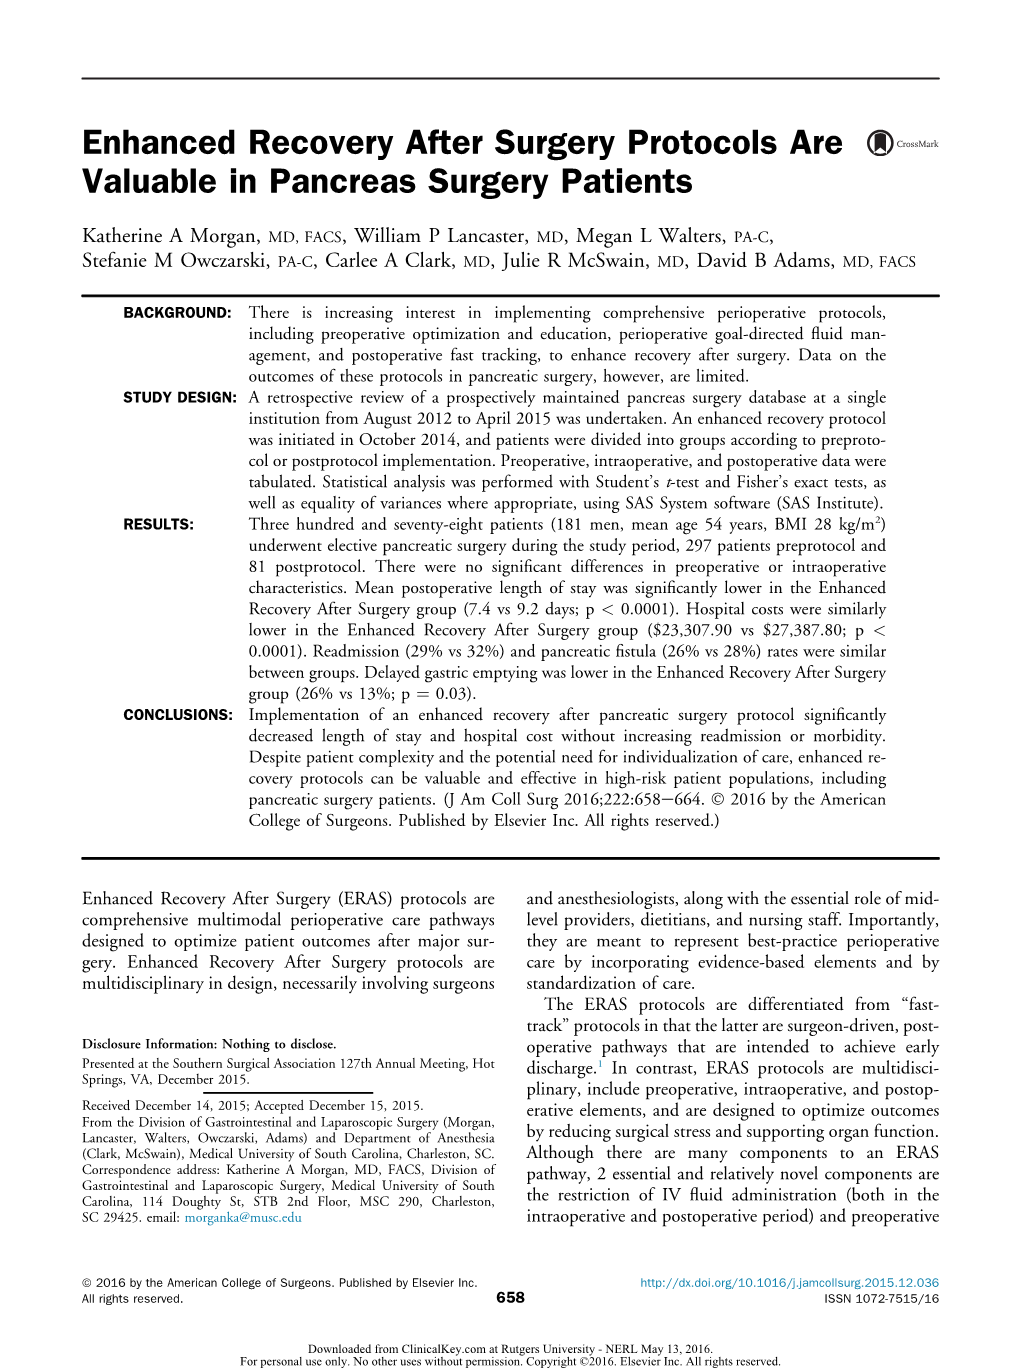 Enhanced Recovery After Surgery Protocols Are Valuable in Pancreas Surgery Patients